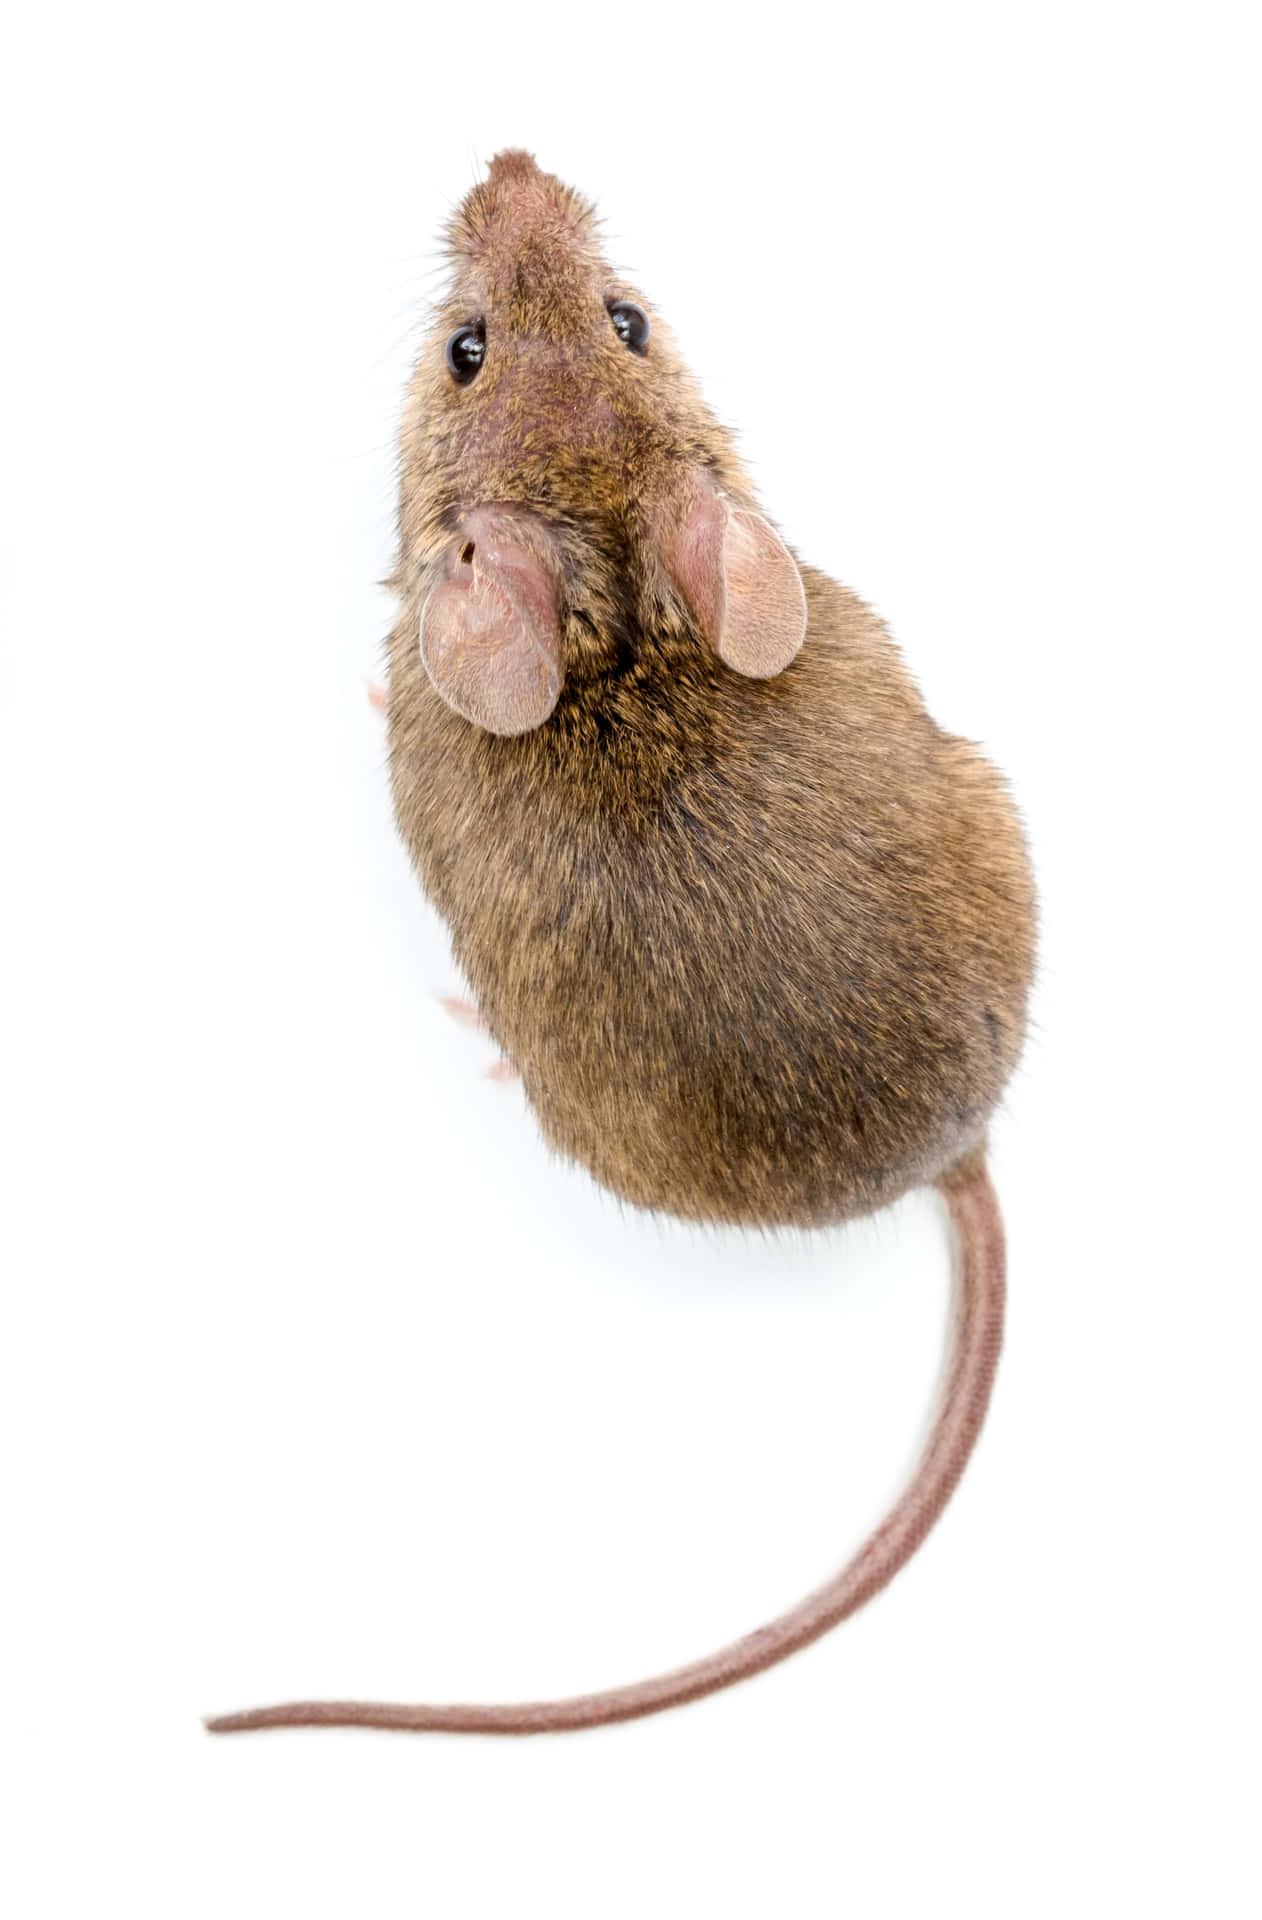 Cute and Adorable Mouse